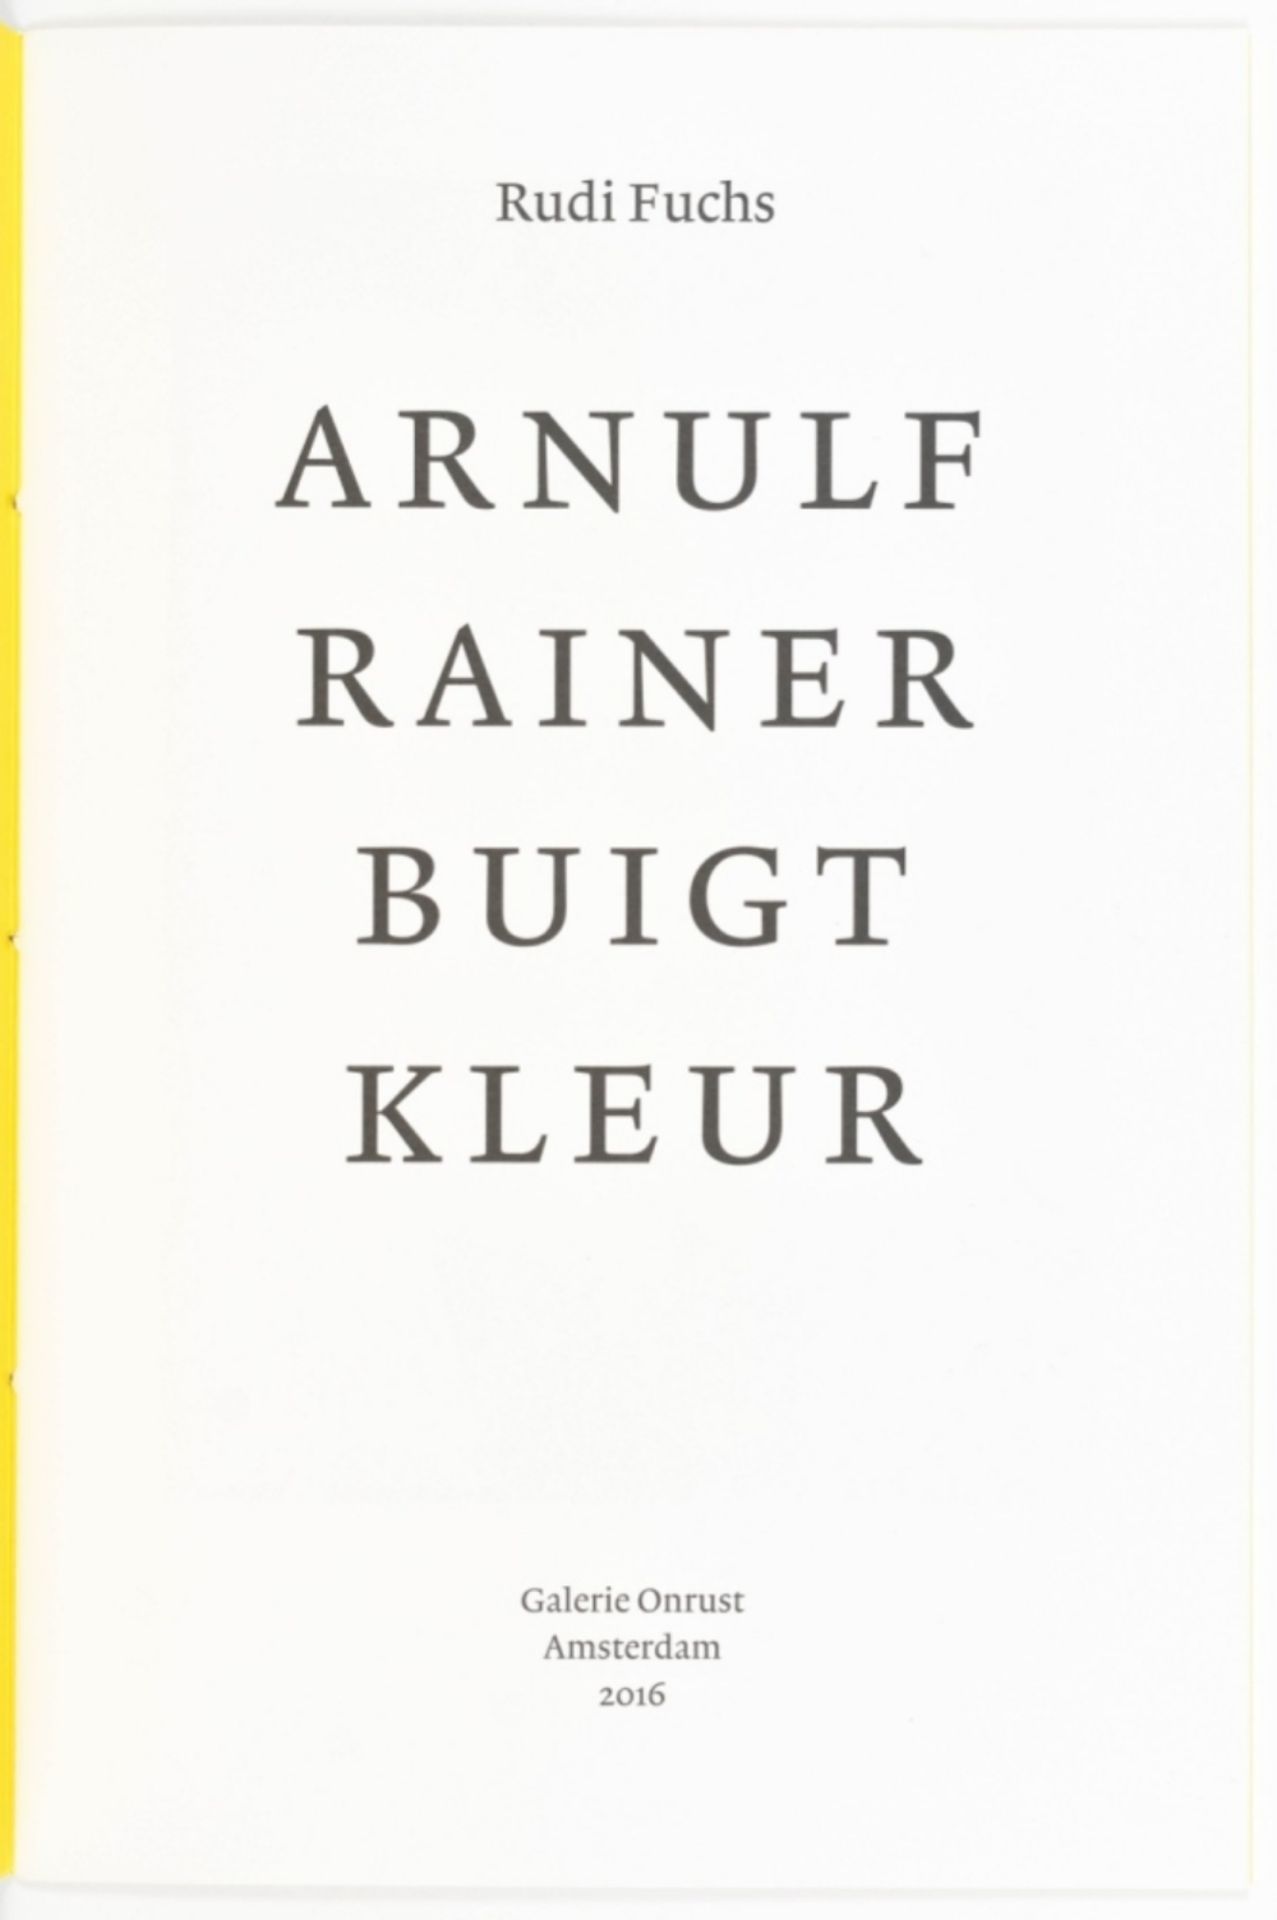 18 publications and catalogues of Arnulf Reiner: Arnulf Reiner - Image 7 of 8